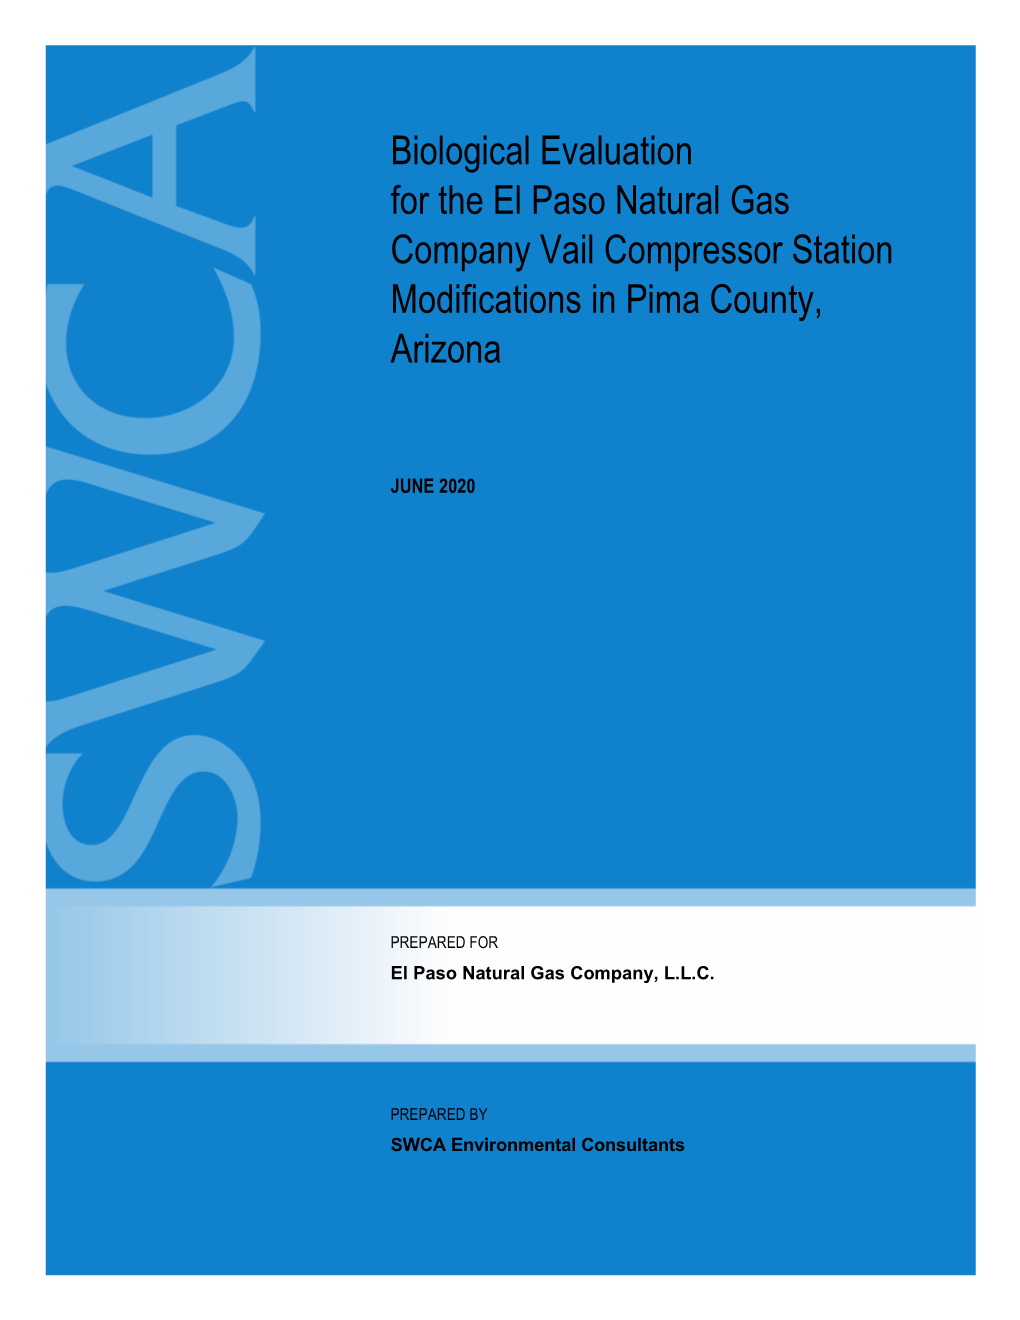 Biological Evaluation for the El Paso Natural Gas Company Vail Compressor Station Modifications in Pima County, Arizona